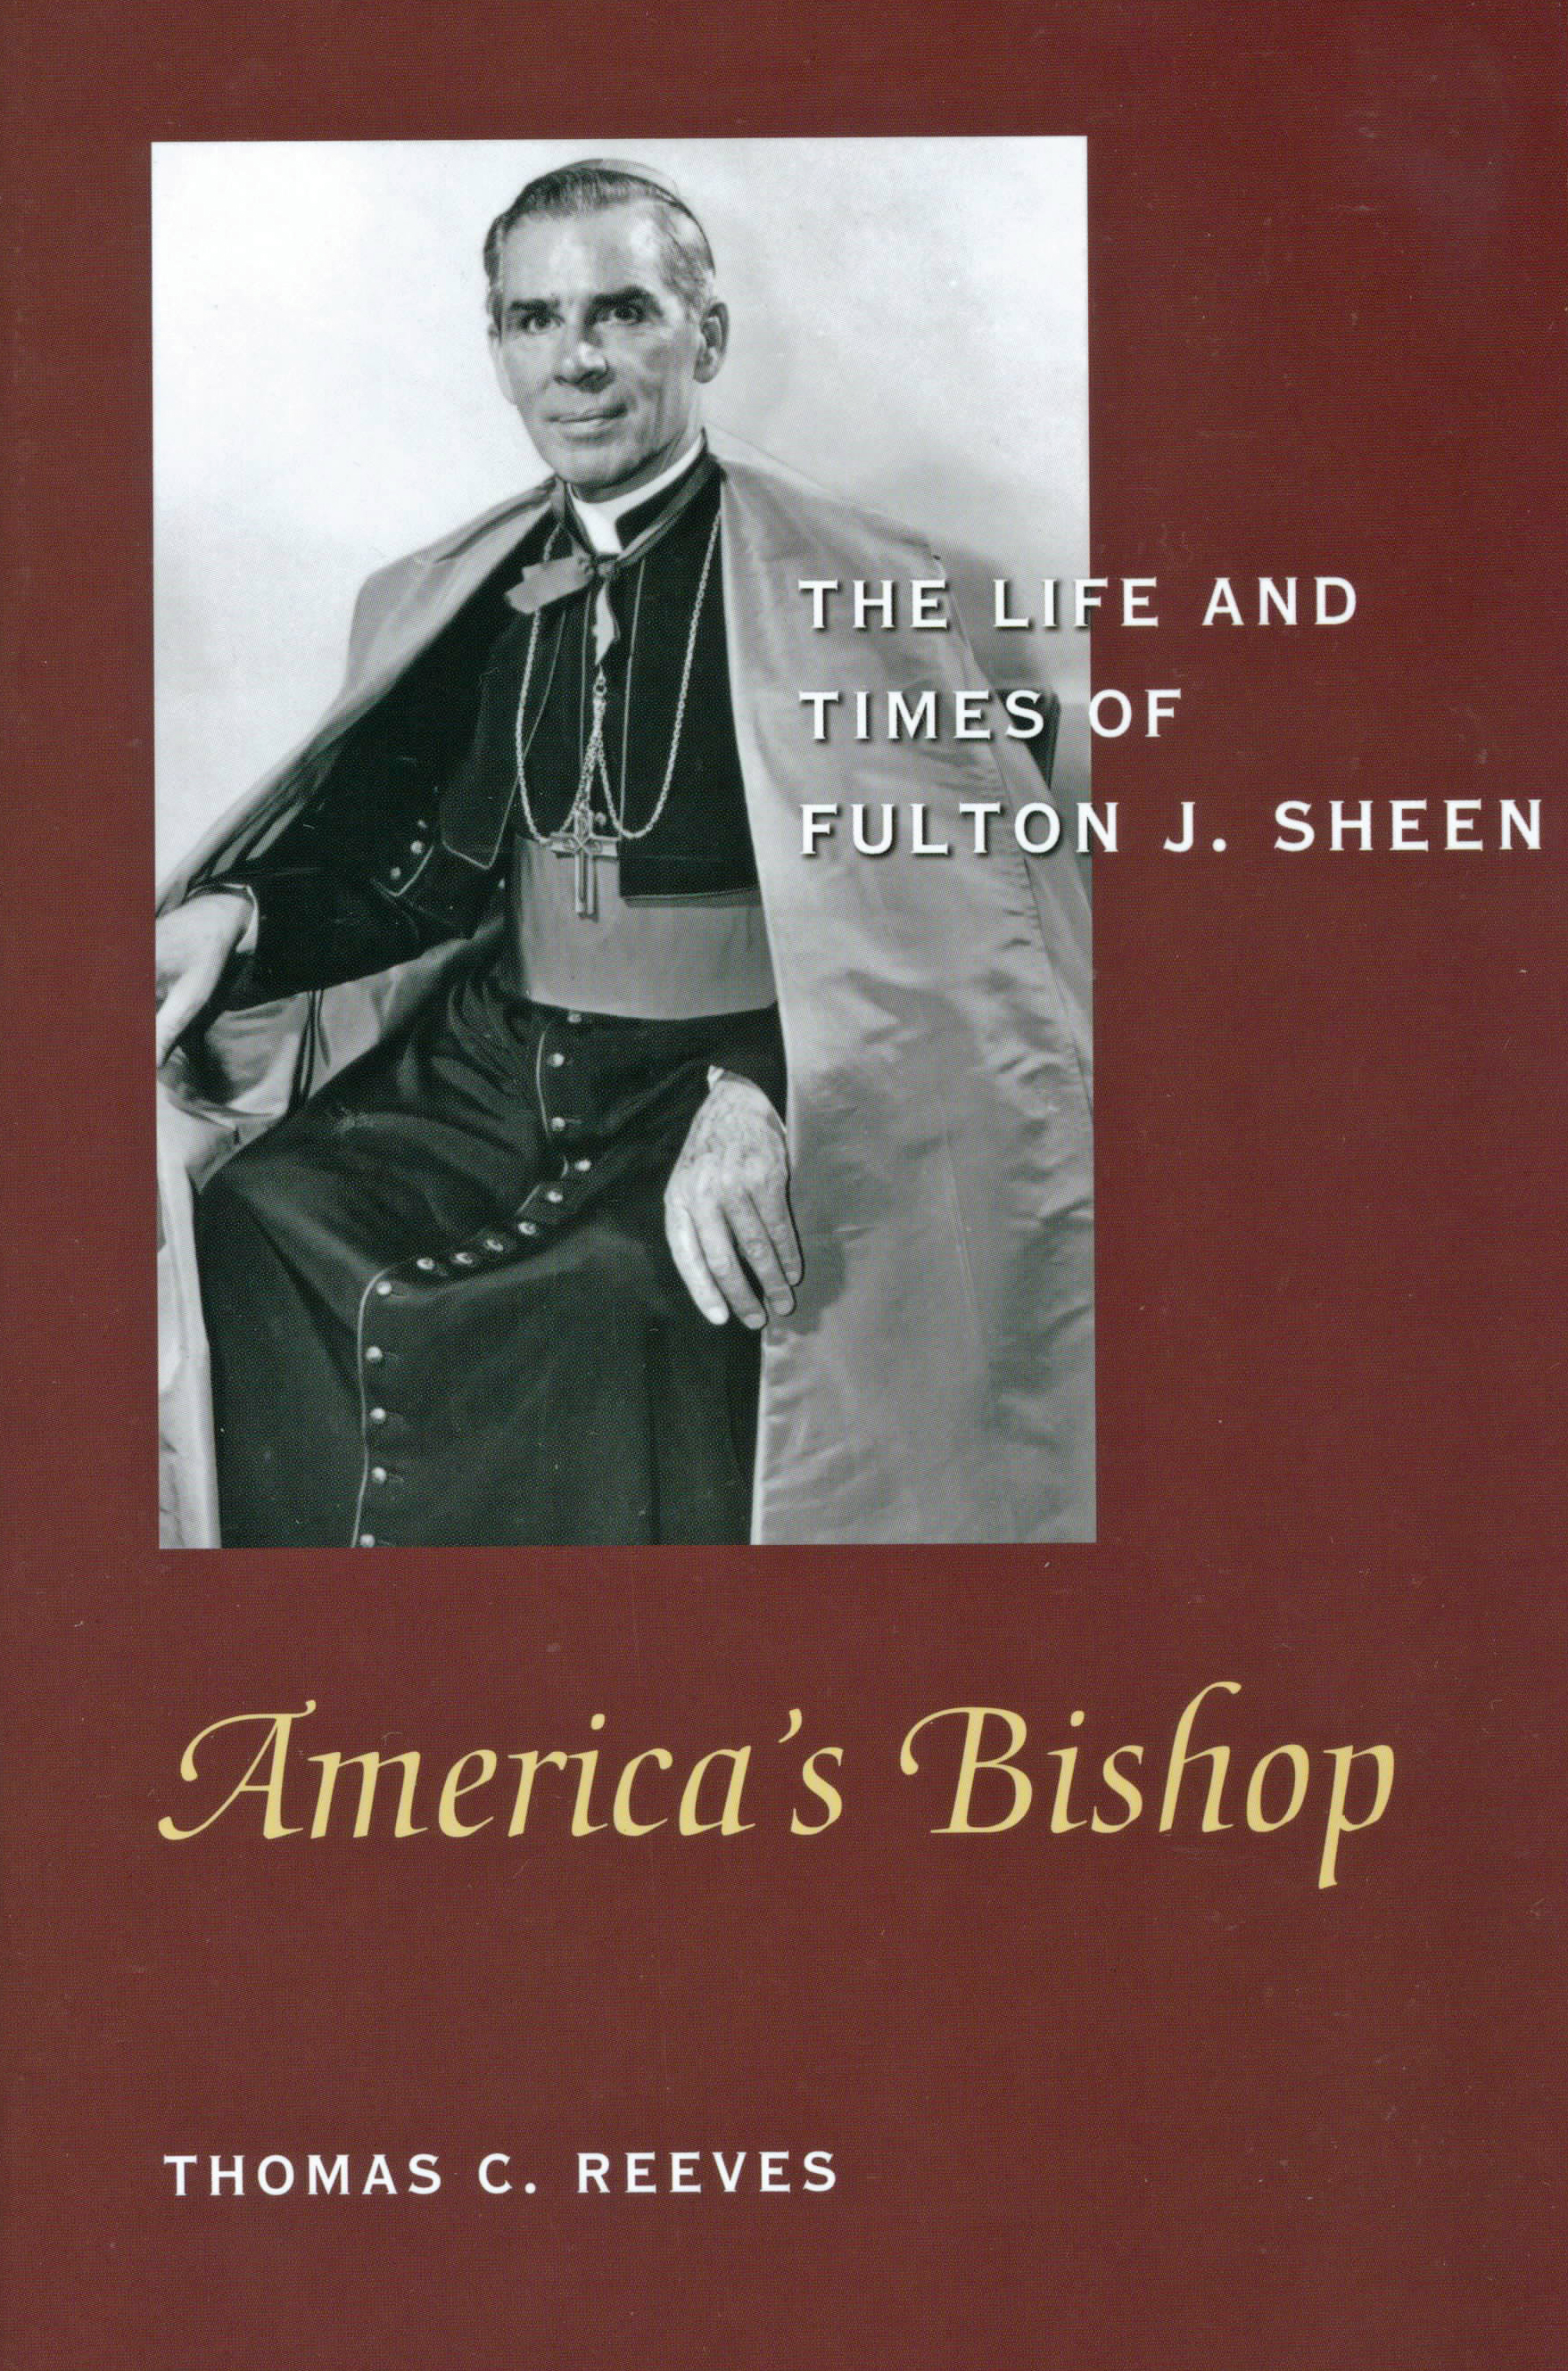 America's Bishop: The Life and Times of Fulton J. Sheen by Thomas C. Reeves 108-9781893554610